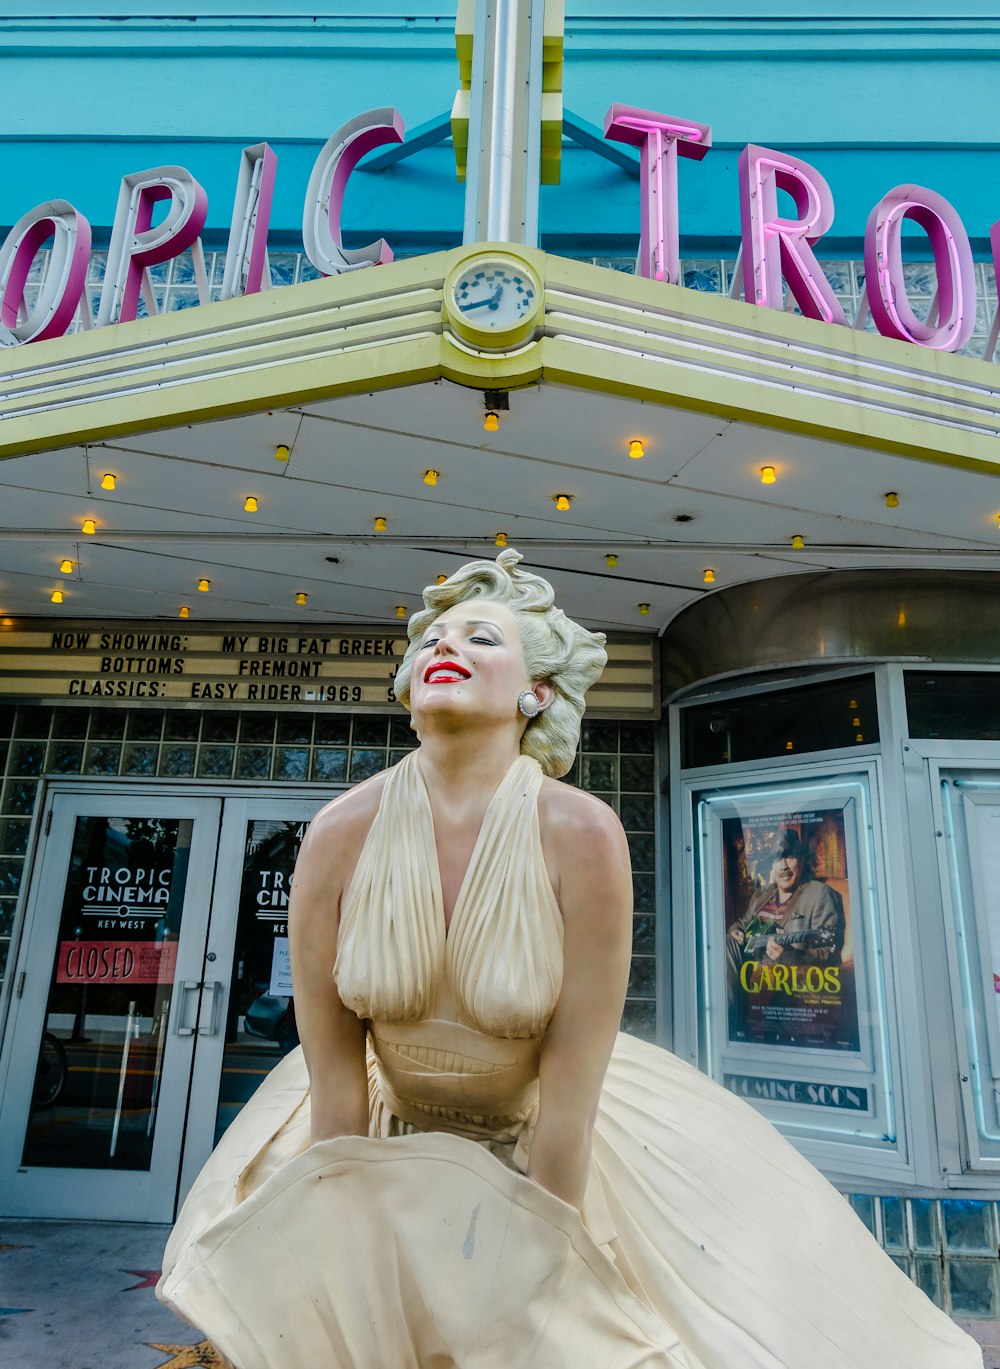 a statue of marilyn monroe in front of a theater